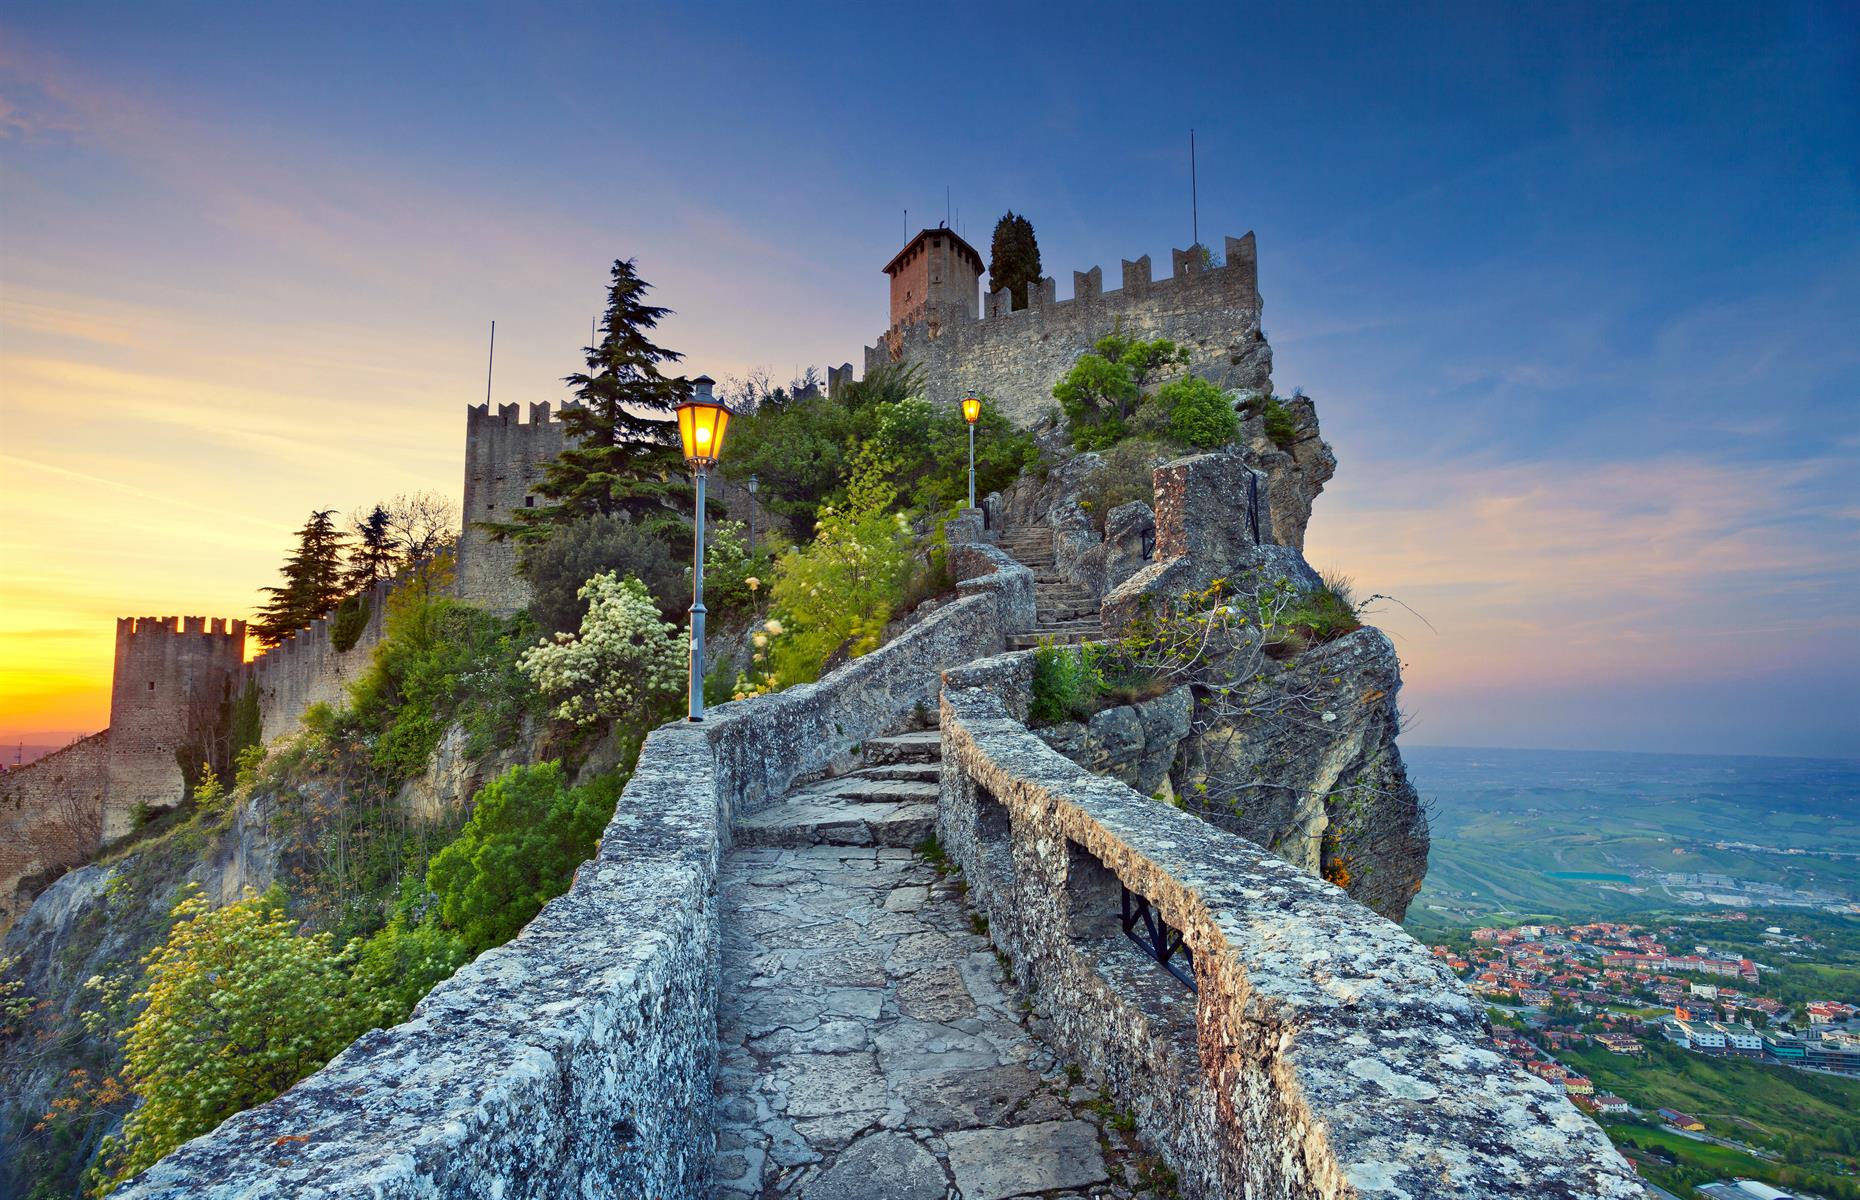 <p>San Marino, a microstate surrounded by Italy, bears the distinction of being the world's oldest republic and Europe's third smallest state.</p>  <p>Residents who call this historic country home can enjoy visa-free entry to 172 nations, meaning they have one of the world's strongest passports. However, their neighbors in Italy have a much longer list of visa-free destinations. More on that soon...</p>